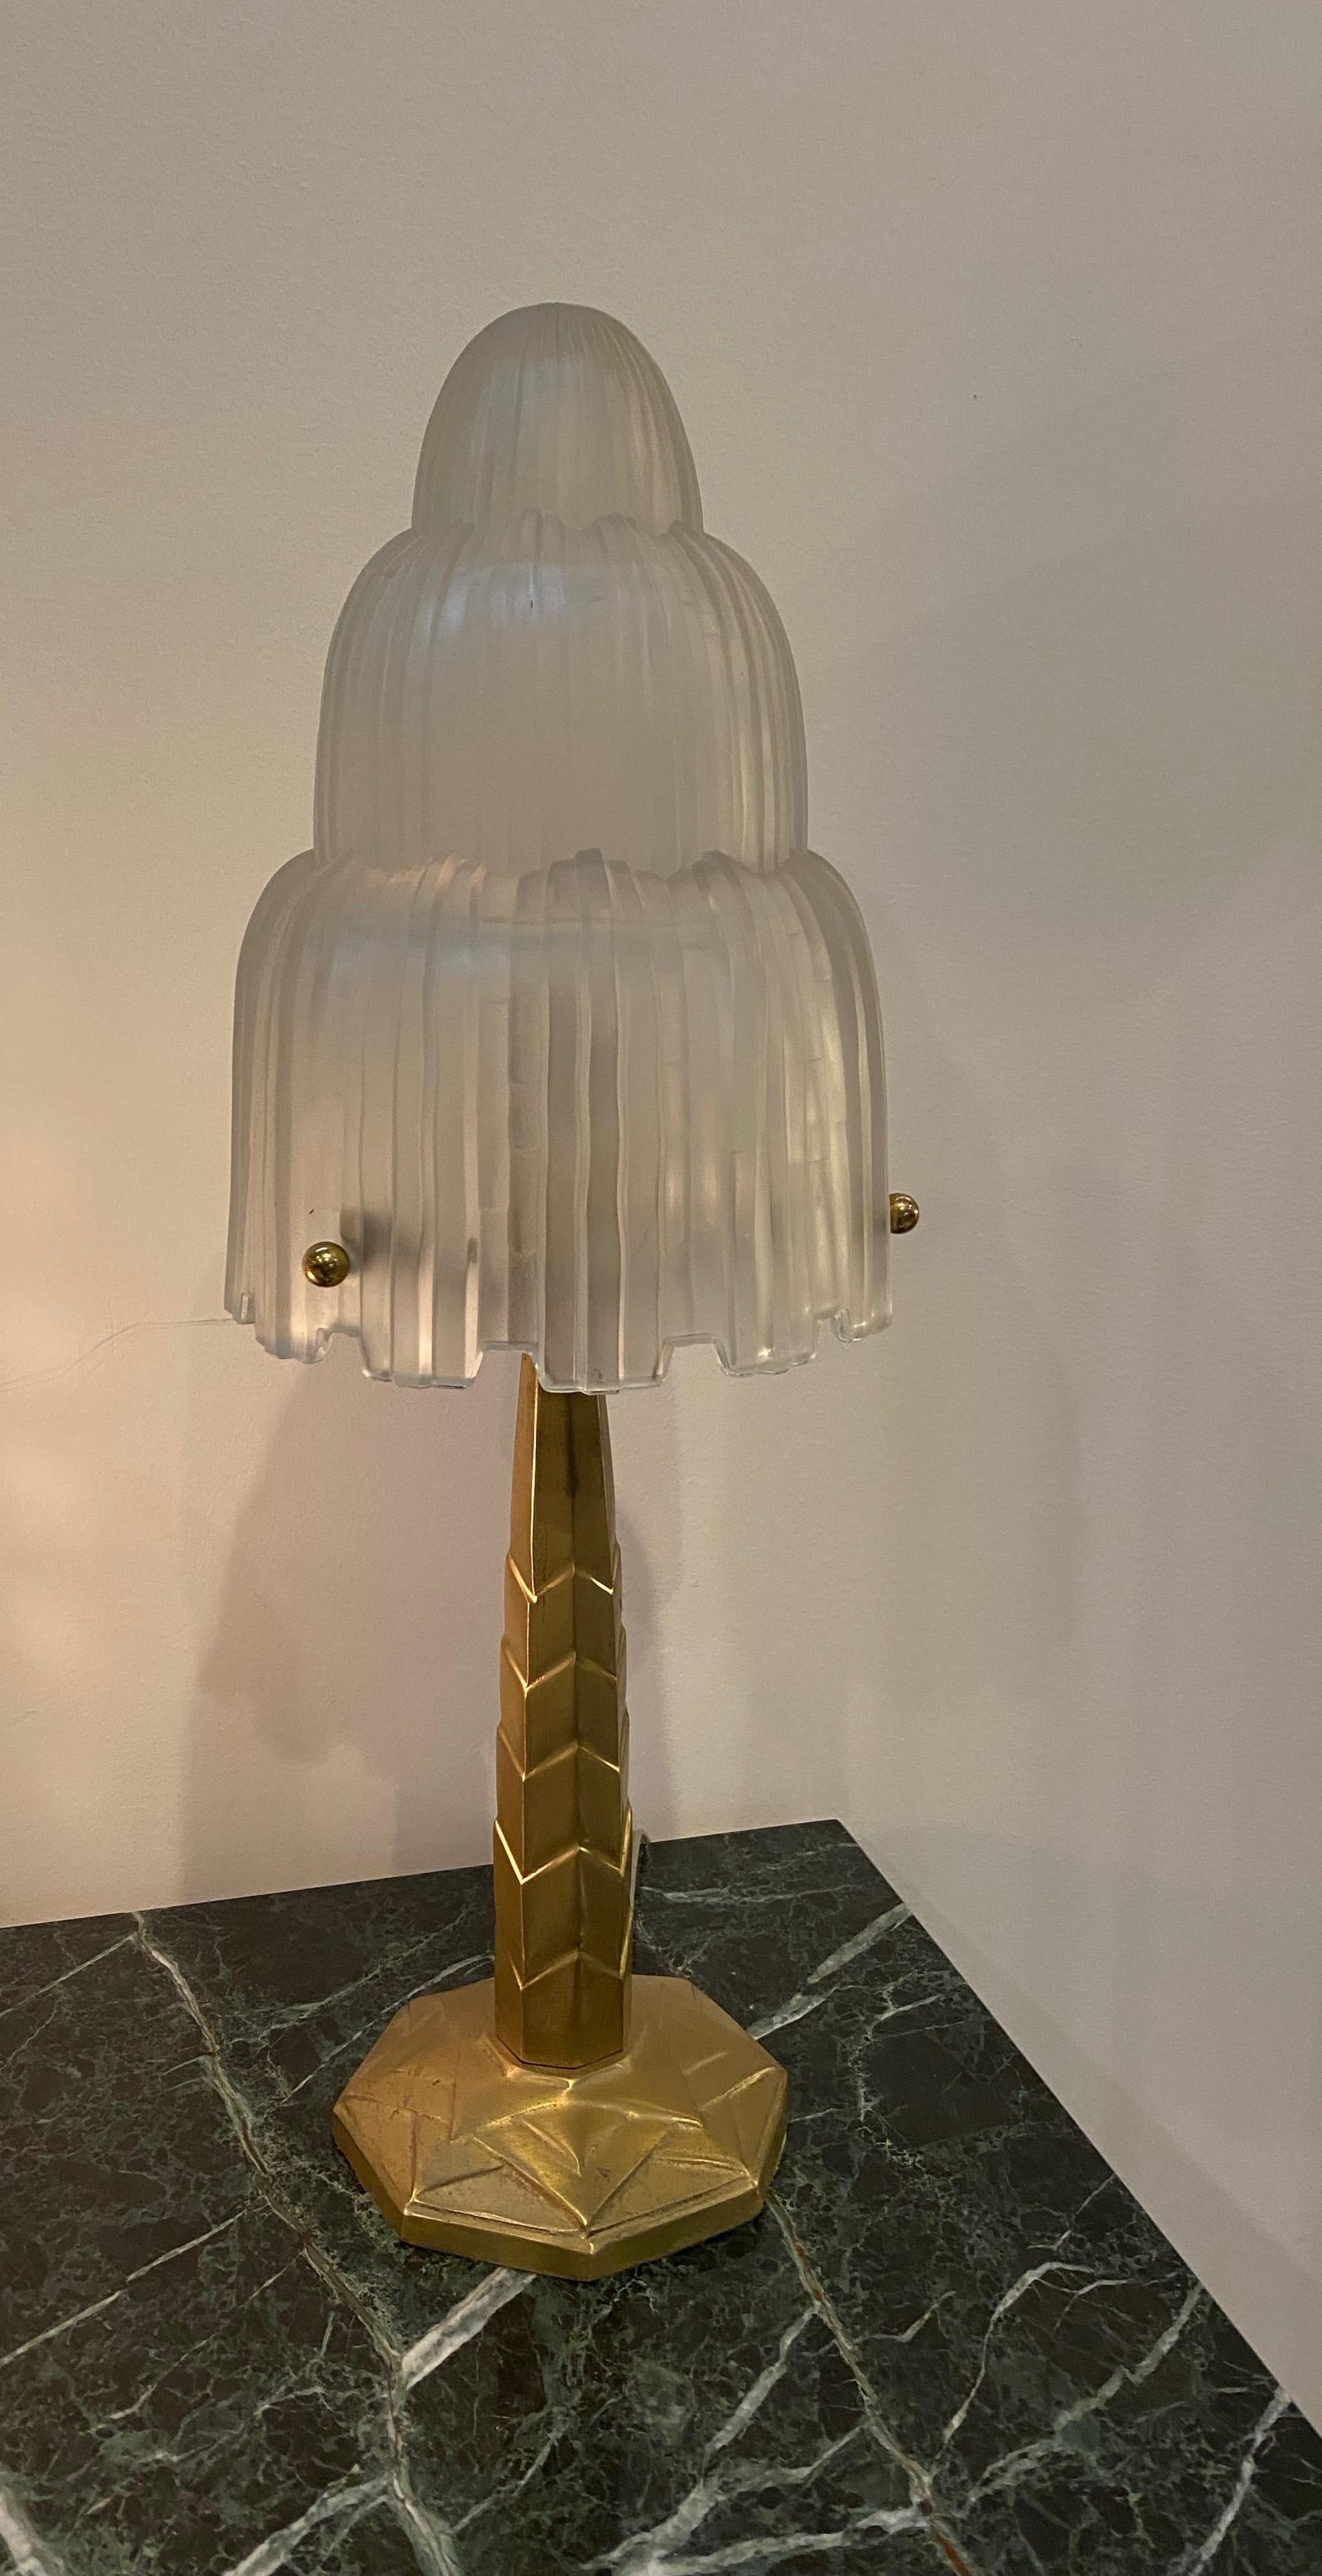 Single French Art Deco table lamp created by famous French artist Marius Ernest Sabino. The shade is clear frosted glass with polished details referred to as the 